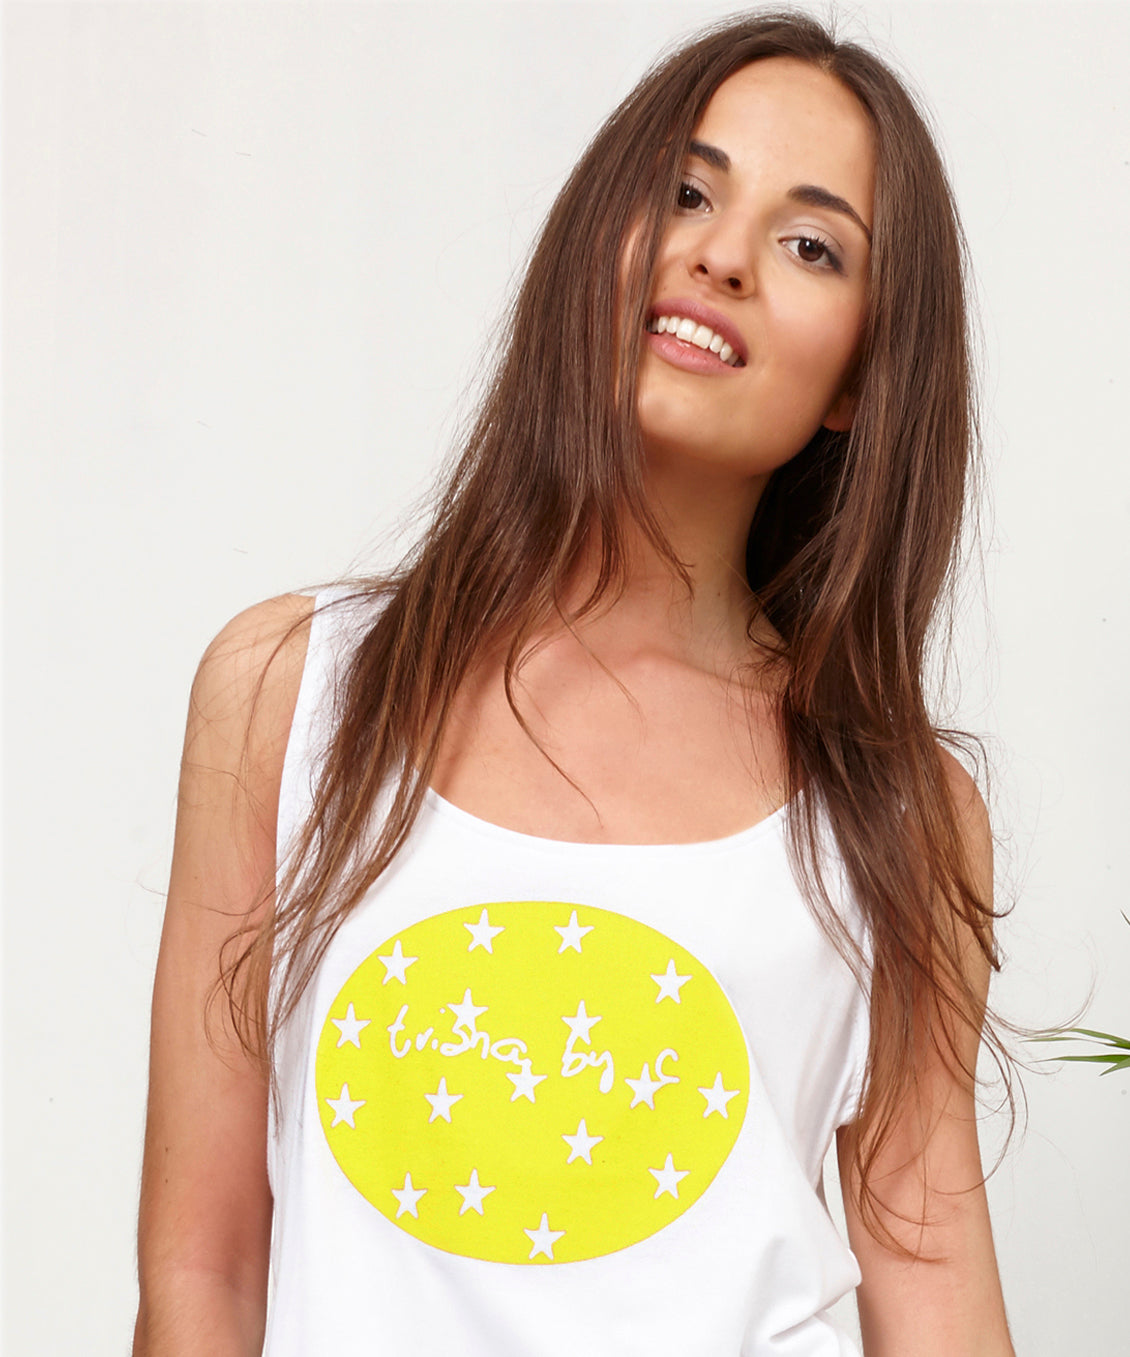 White tank top with yellow circle